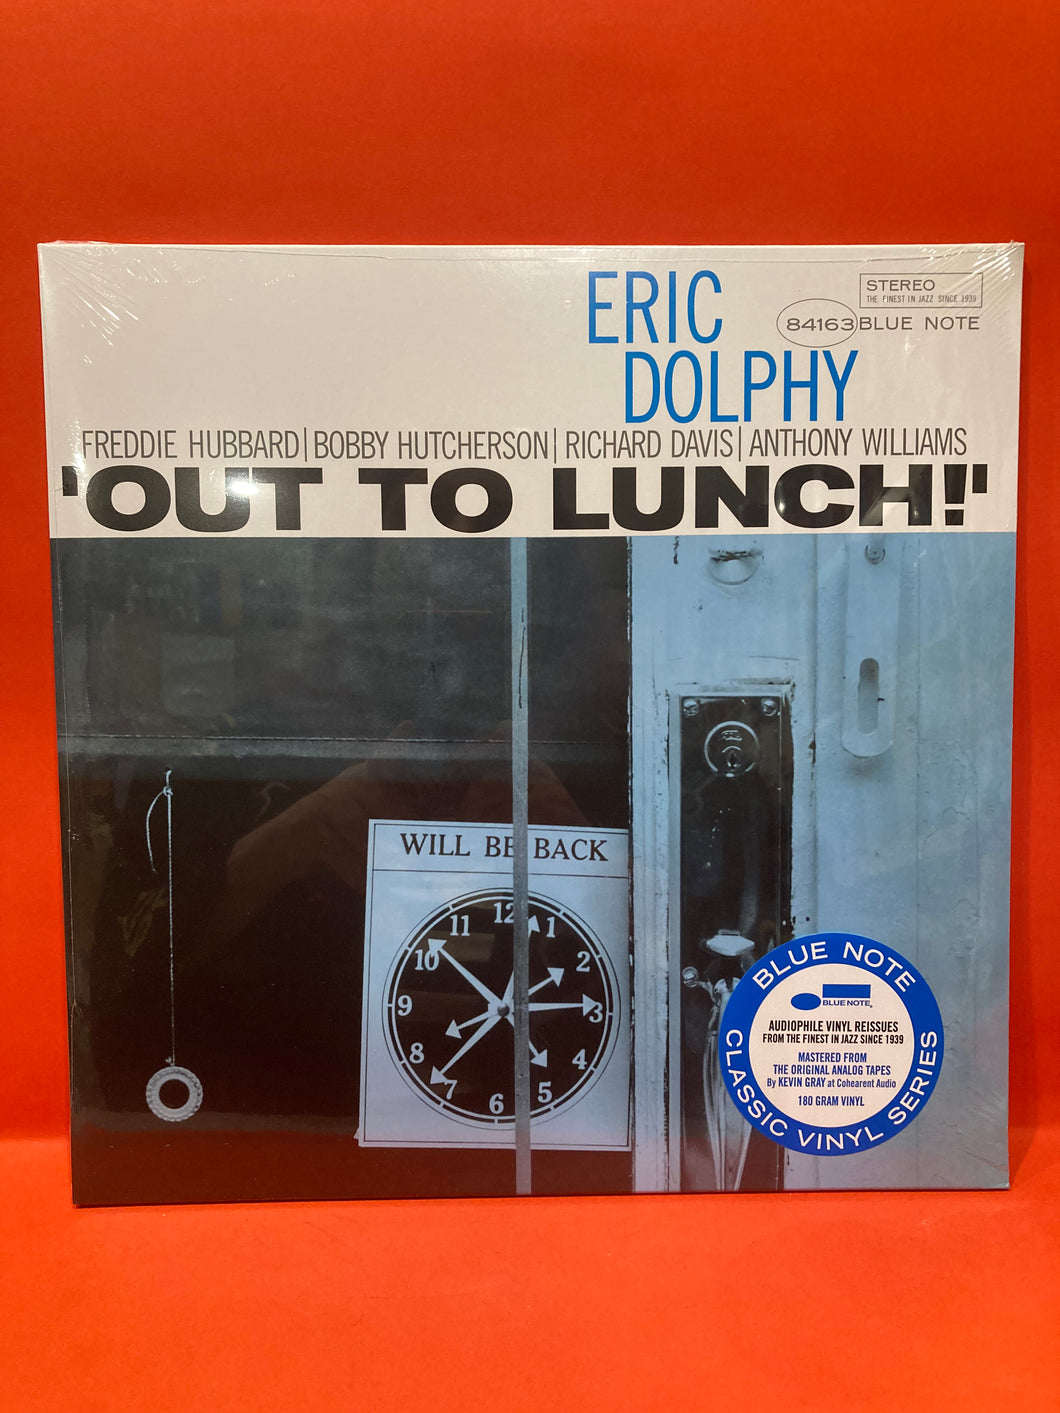 ERIC DOLPHY - OUT TO LUNCH - LP VINYL (NEW/ SEALED)